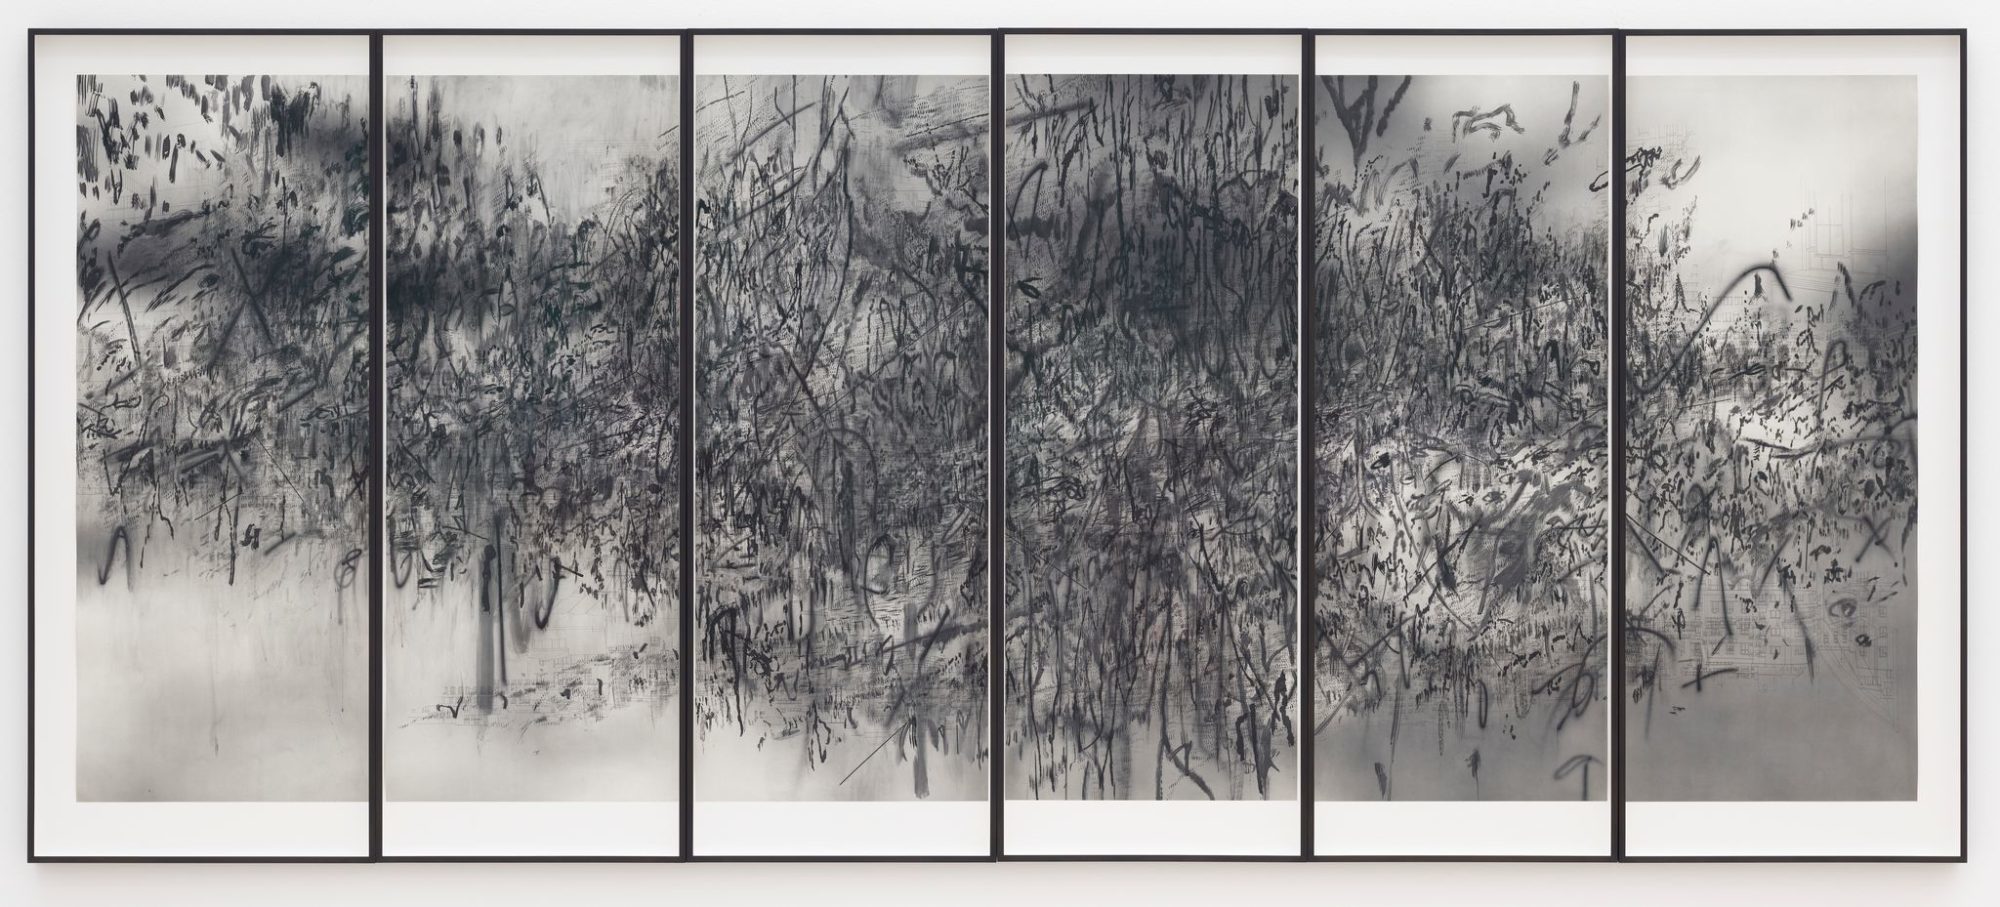 A photograph of a black and white work consisting of six vertical panels. The panels have smudged lines and a denser texture closer to the center of the panels.